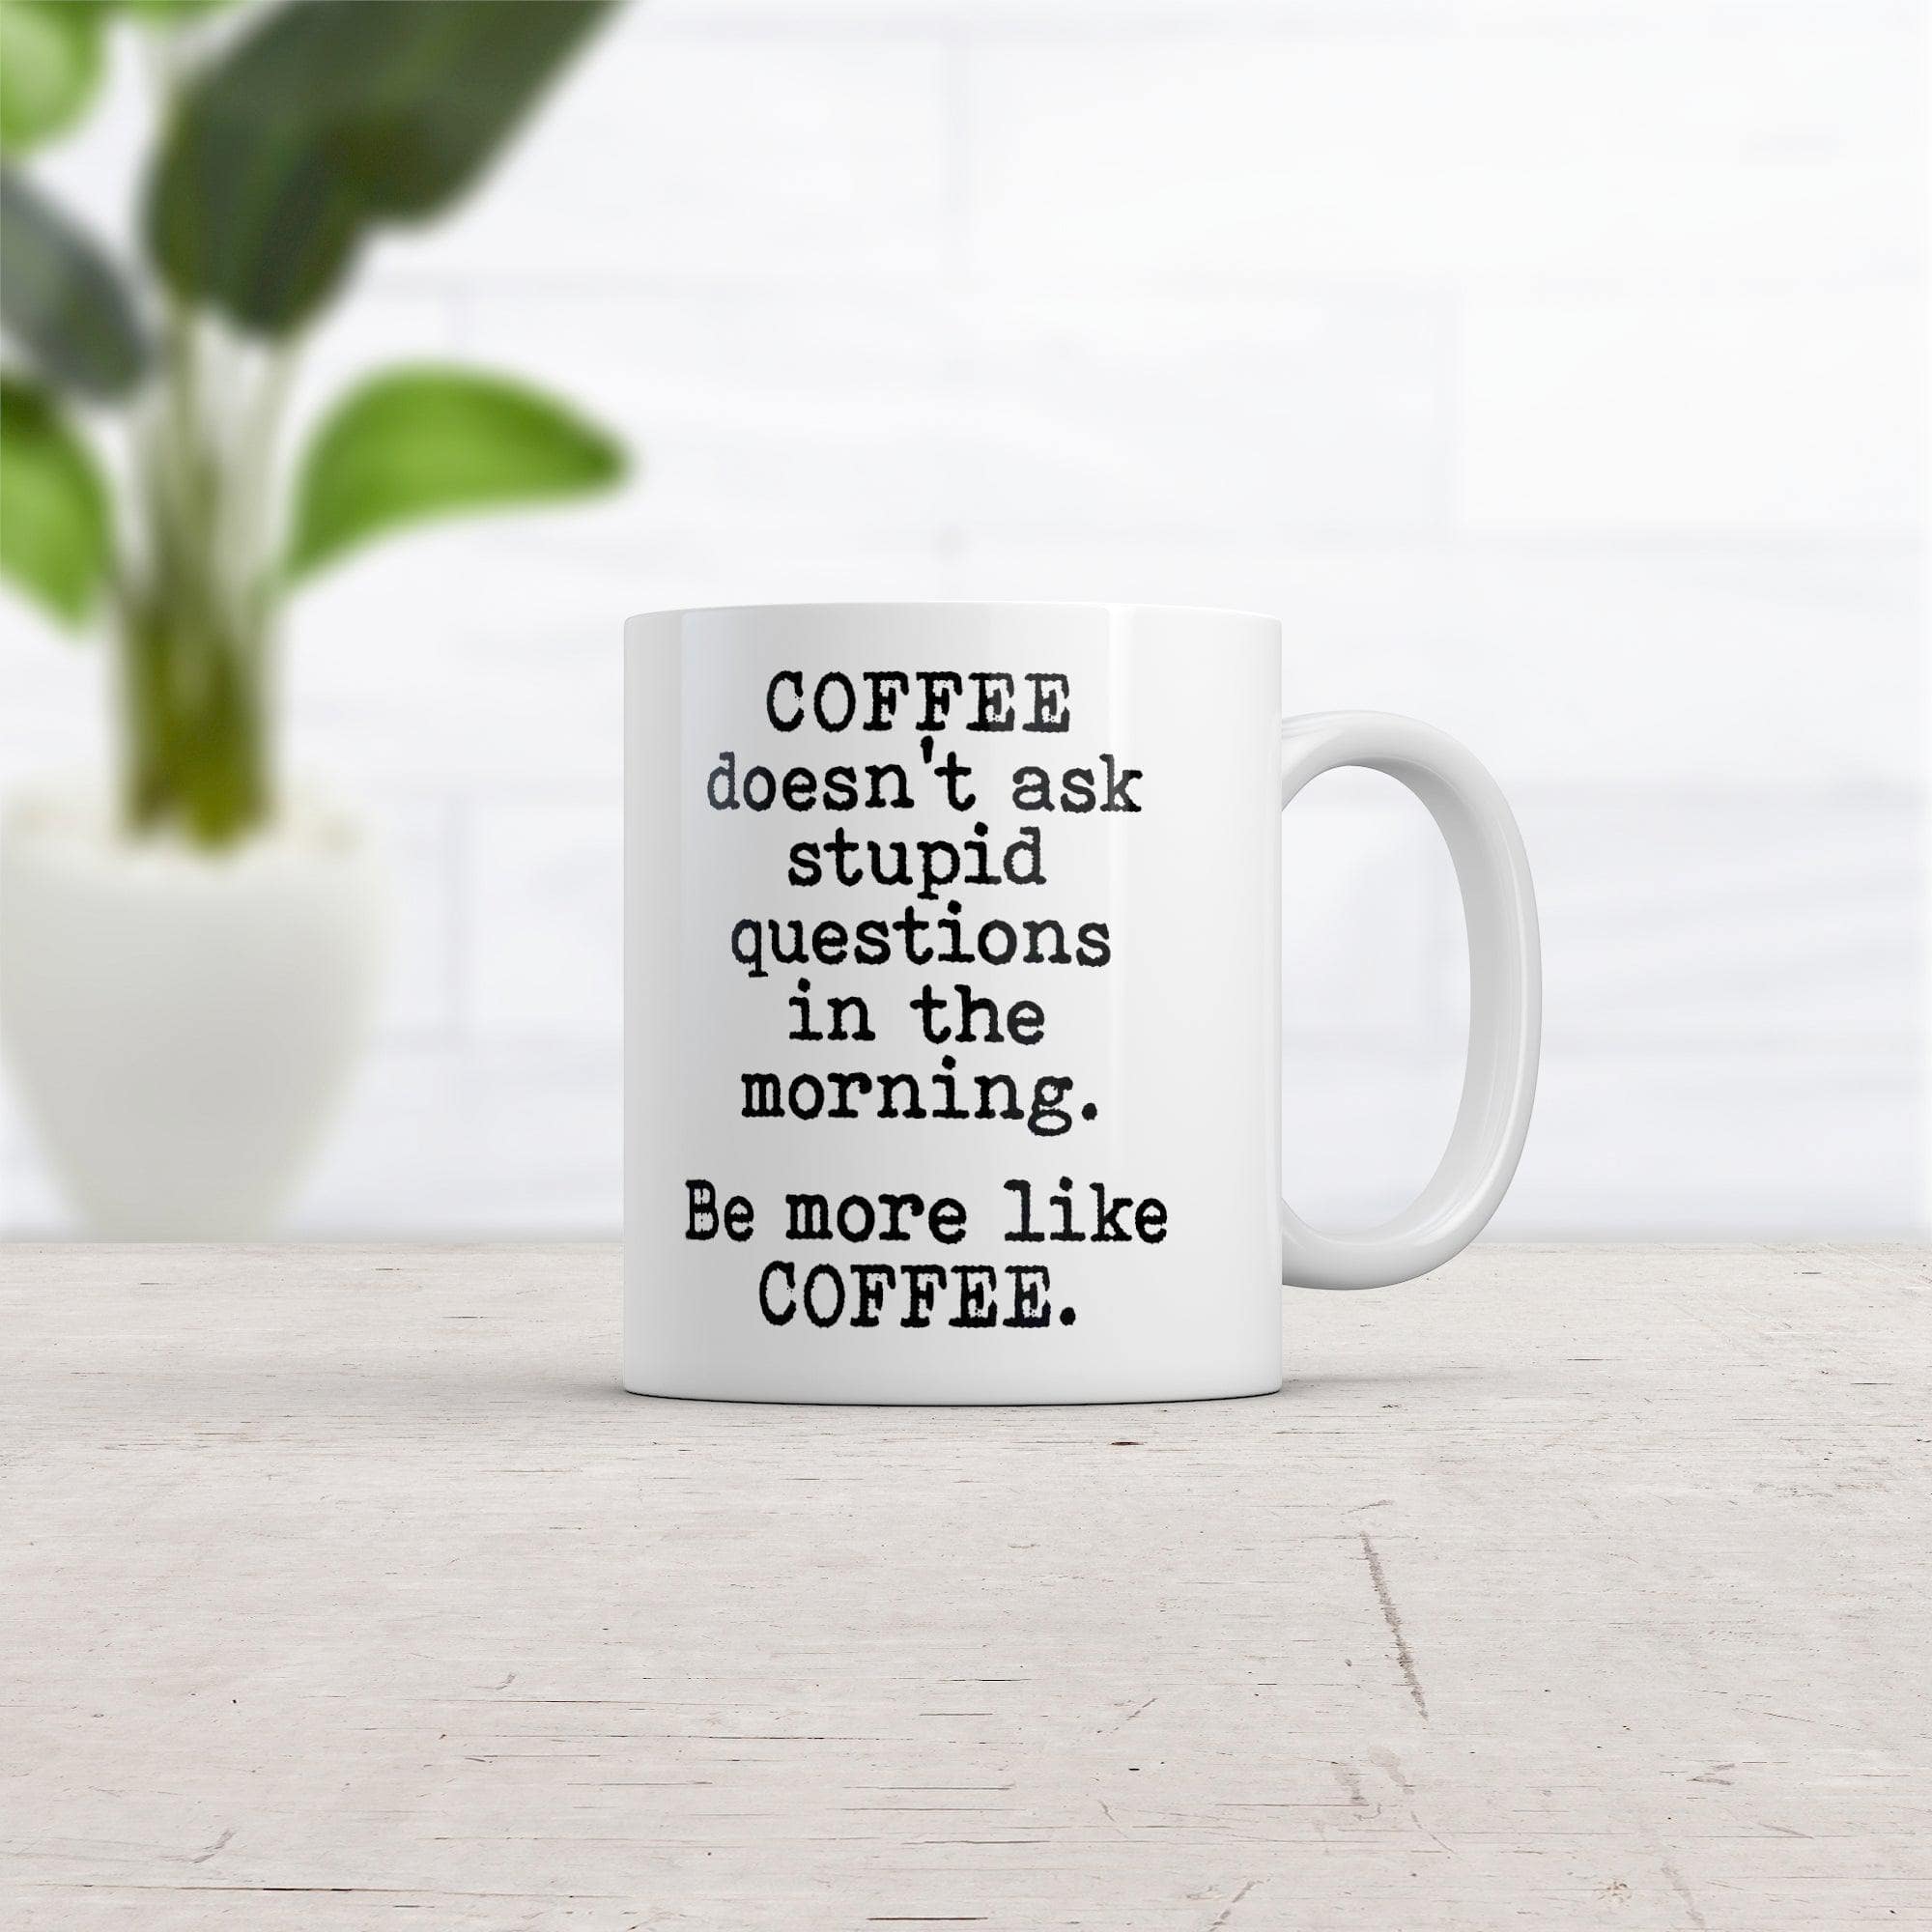 Coffee Doesnt Ask Stupid Questions Mug Funny Sarcastic Caffeine Lovers Novelty Cup-11oz  -  Crazy Dog T-Shirts